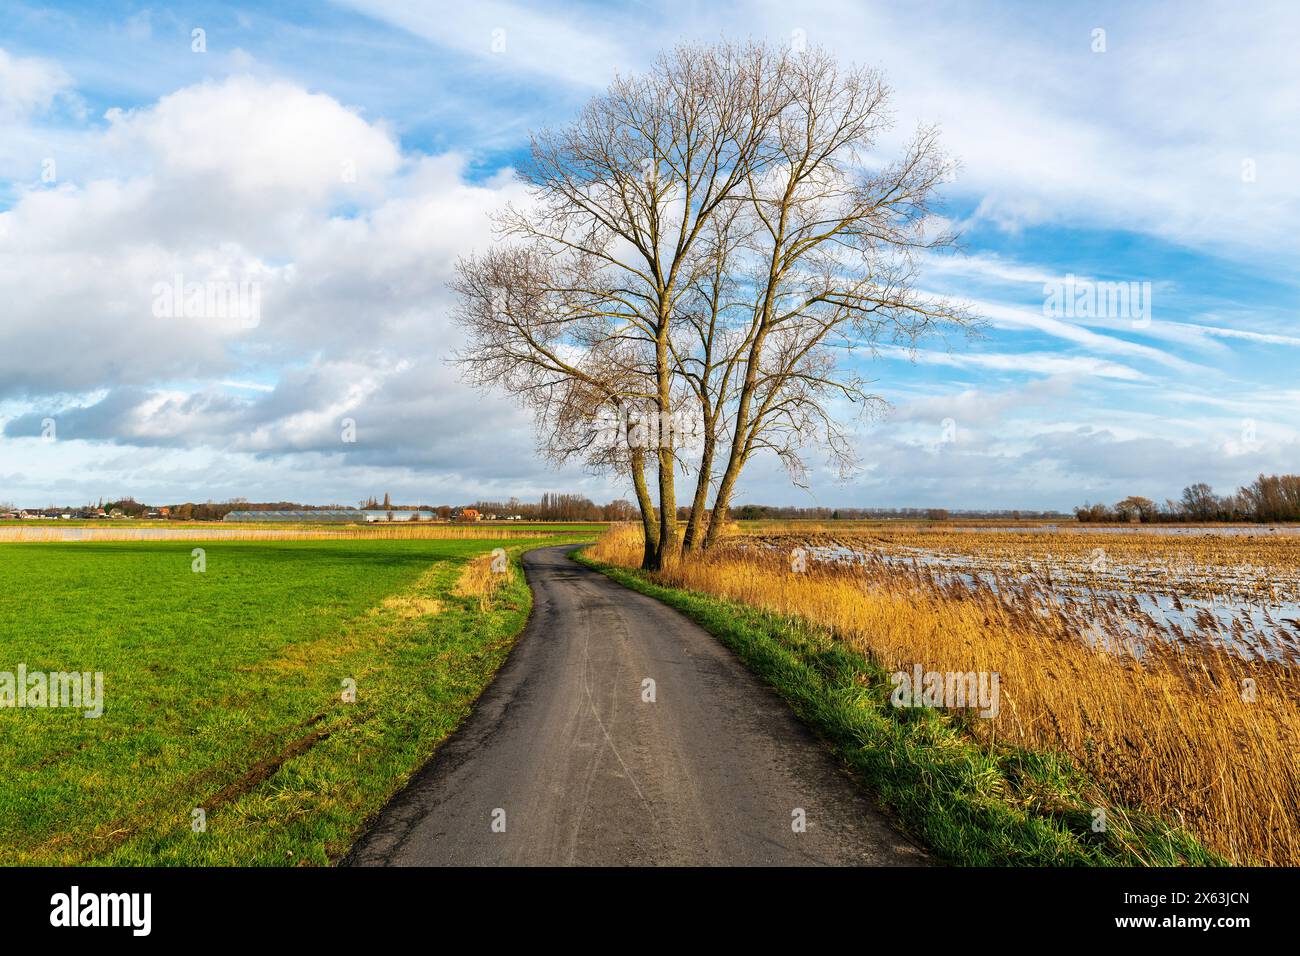 Country road with lonely tree in Gistel, West Flanders, Belgium. Stock Photo